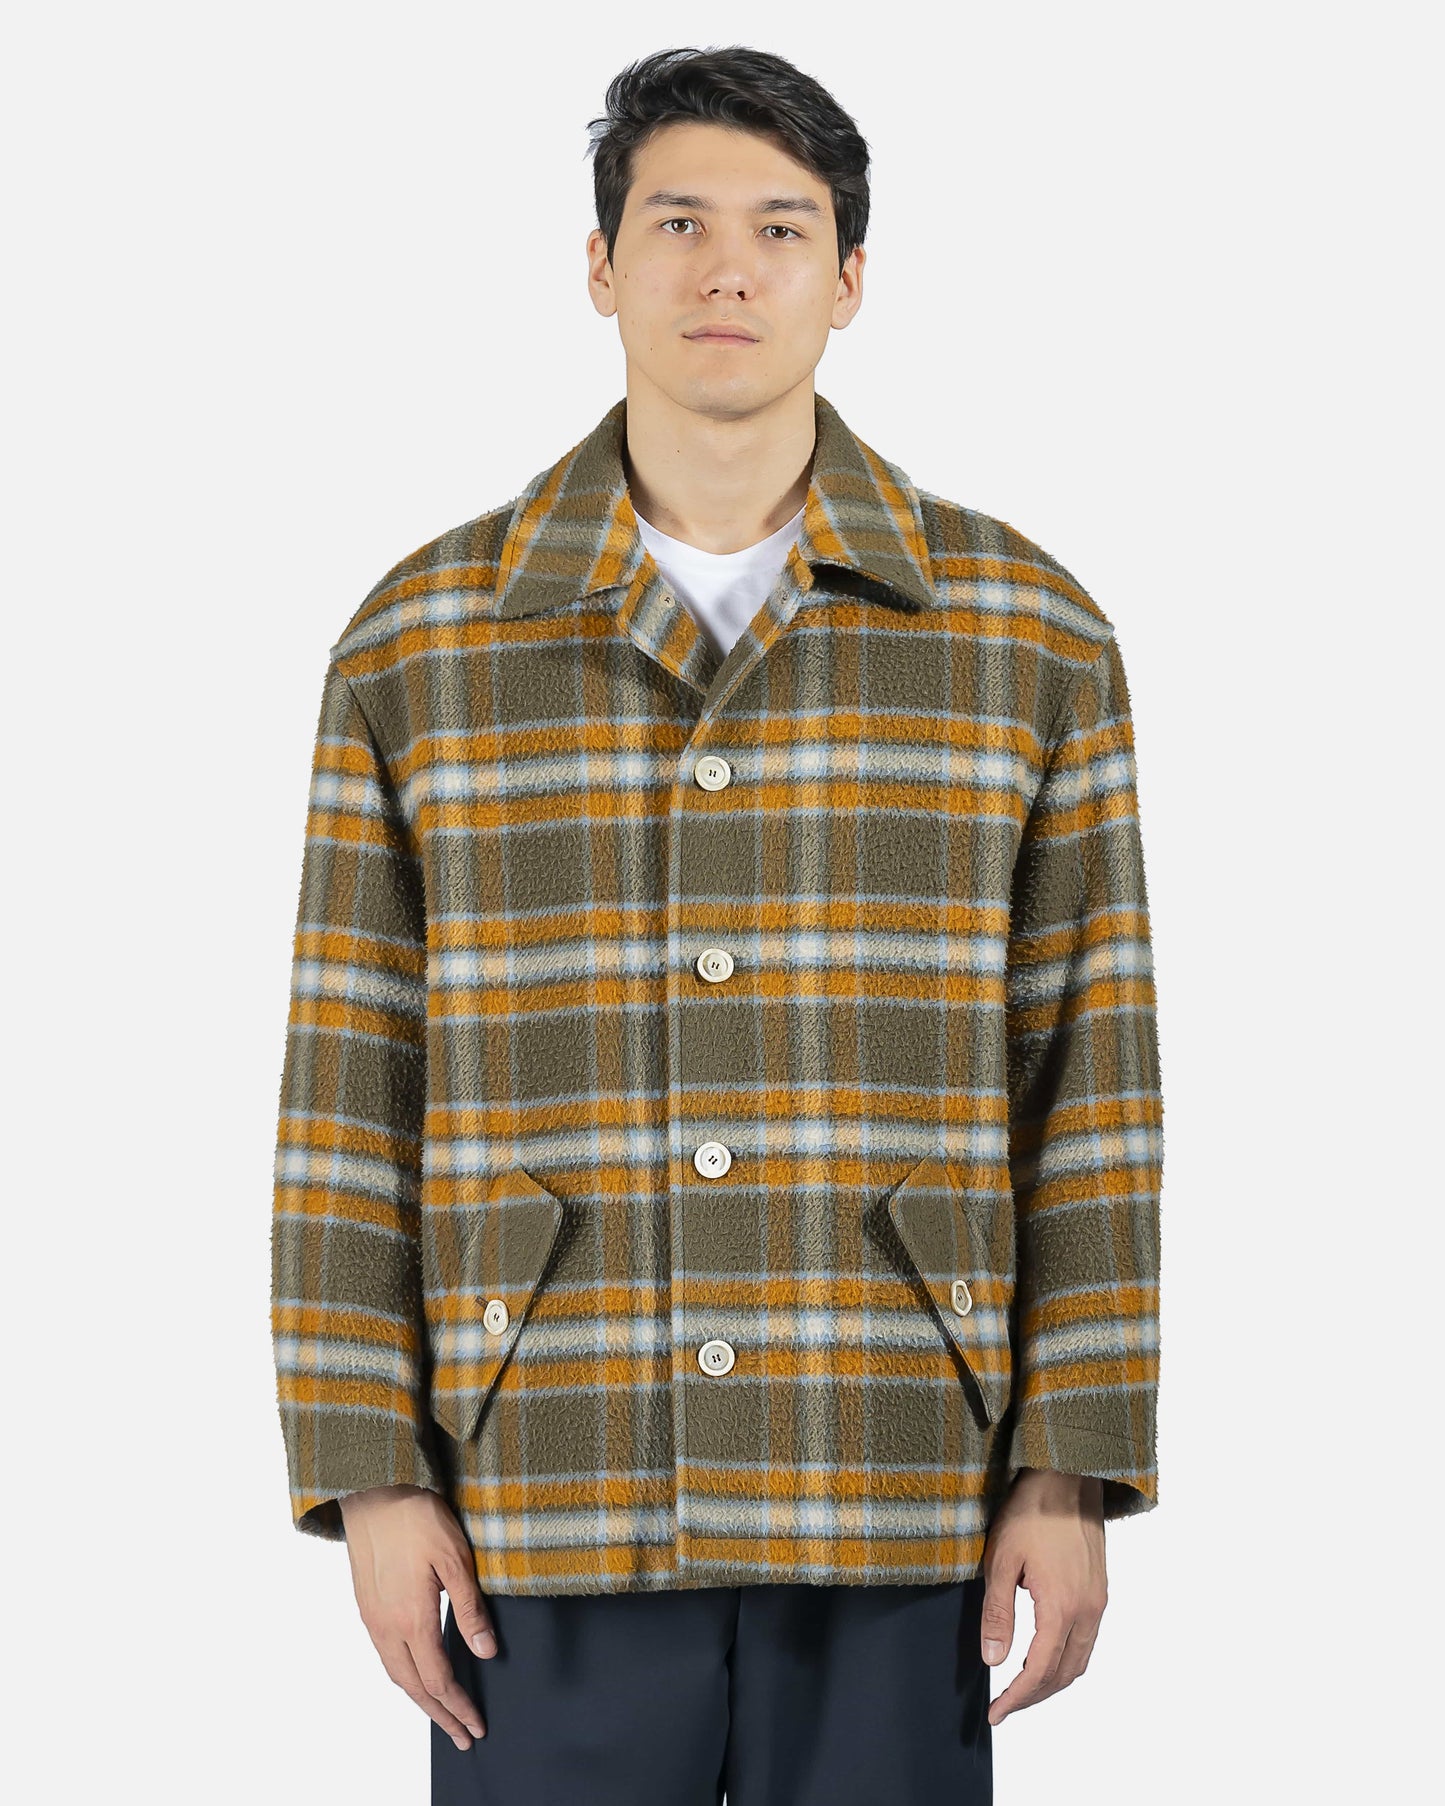 Marni Men's Jackets Button-Up Shirt Jacket in Wool Check